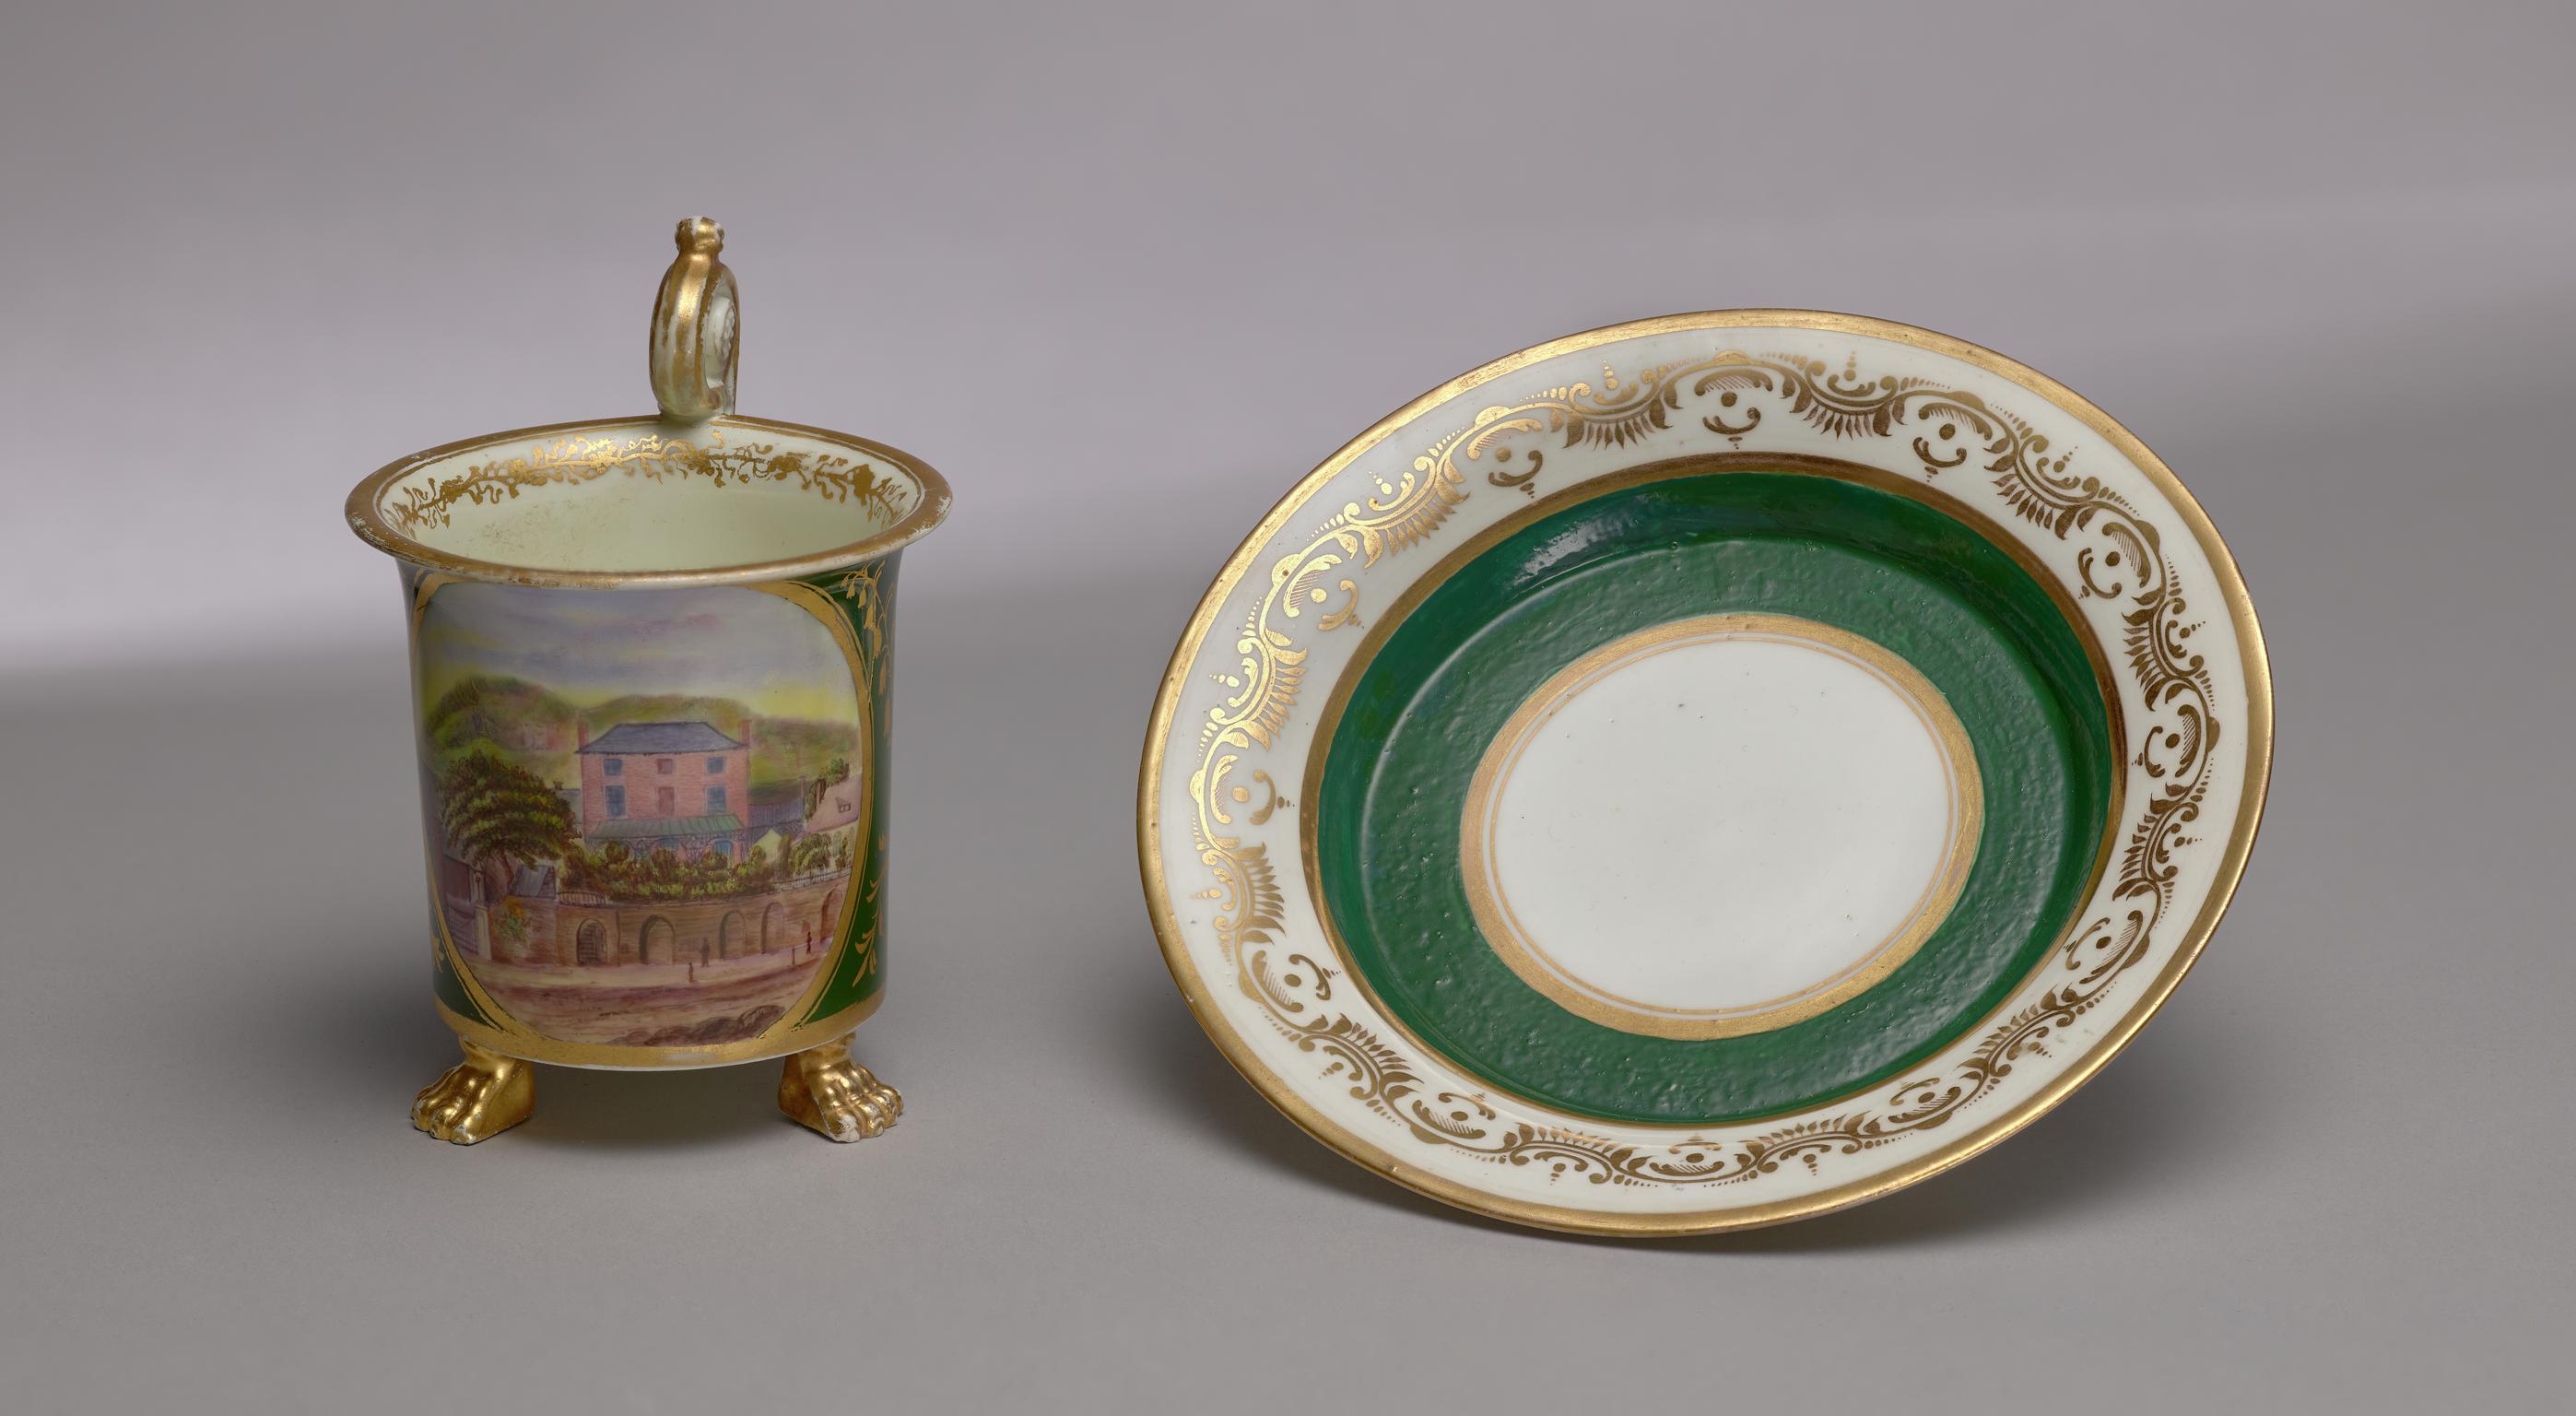 Cup, cabinet and saucer